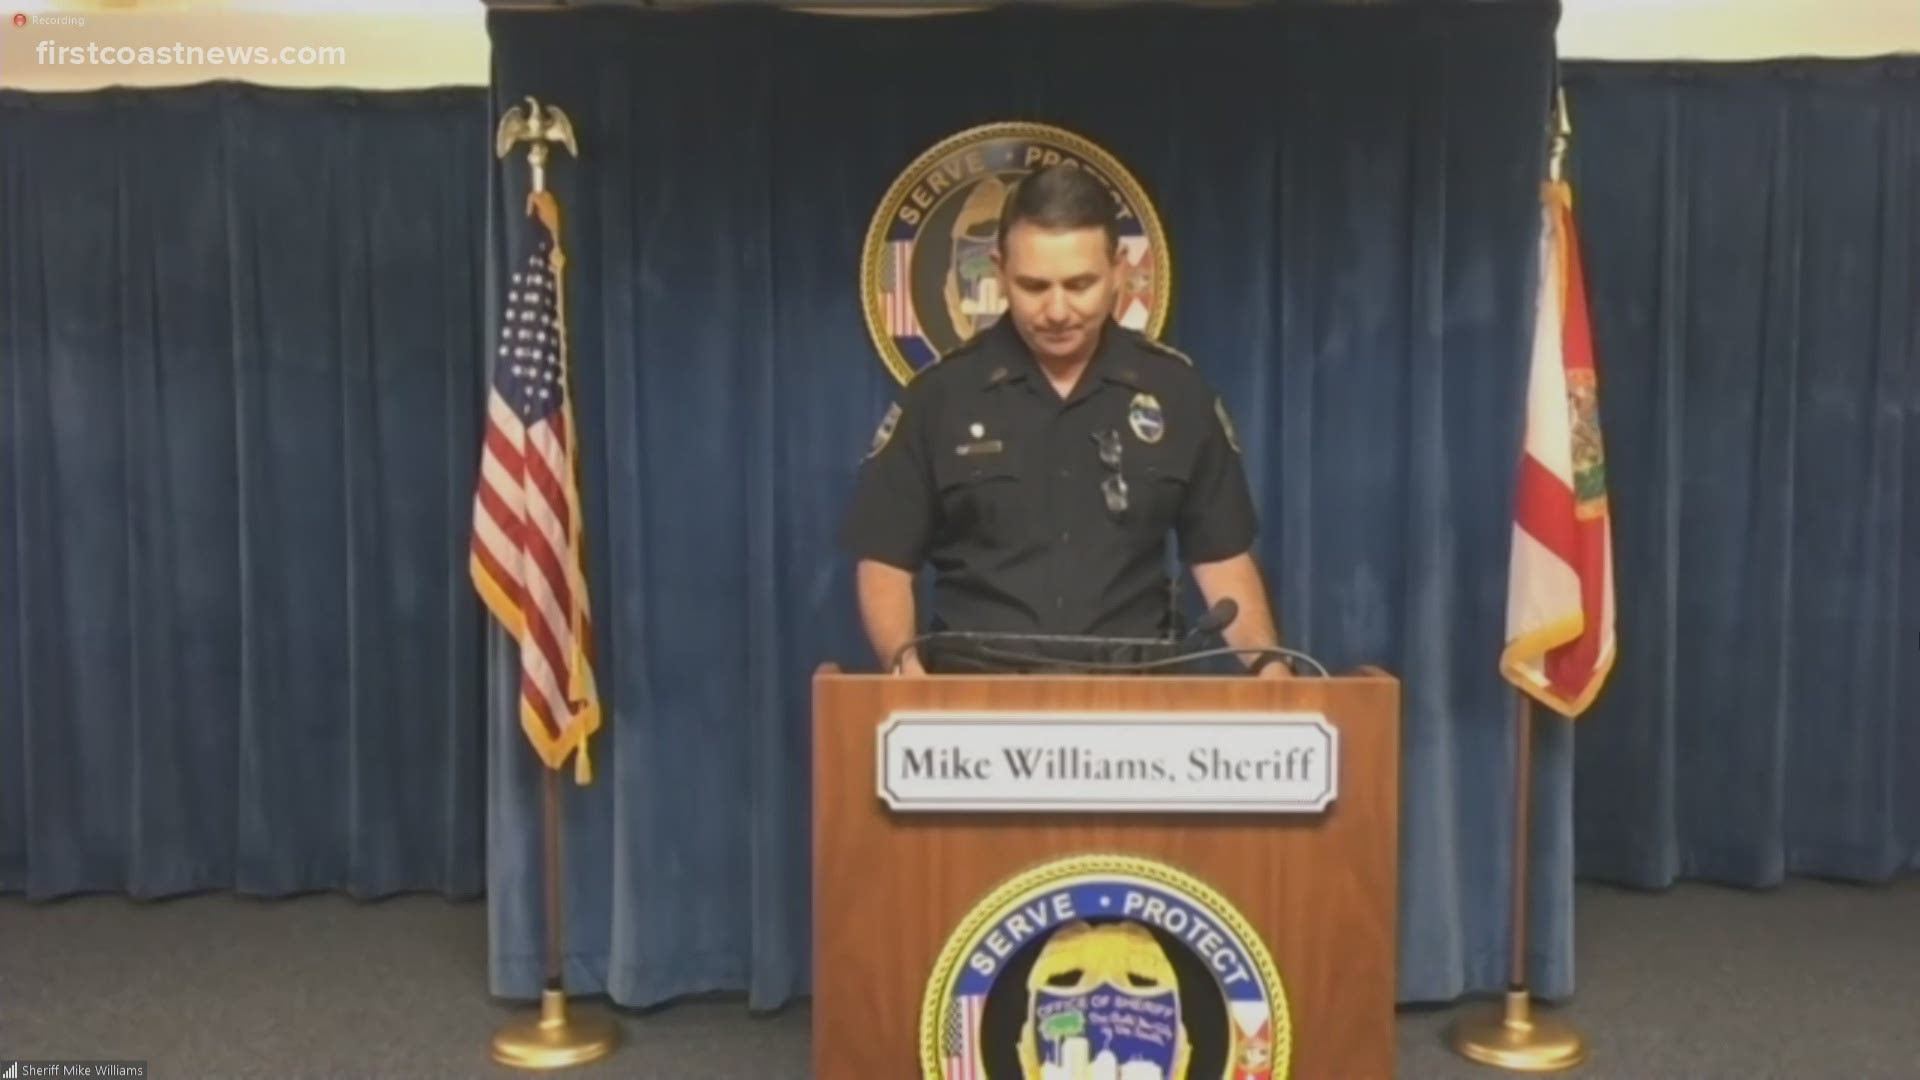 "We lost a child's life over $180," Sheriff Mike Williams said. "We have a family grieving because of $180."